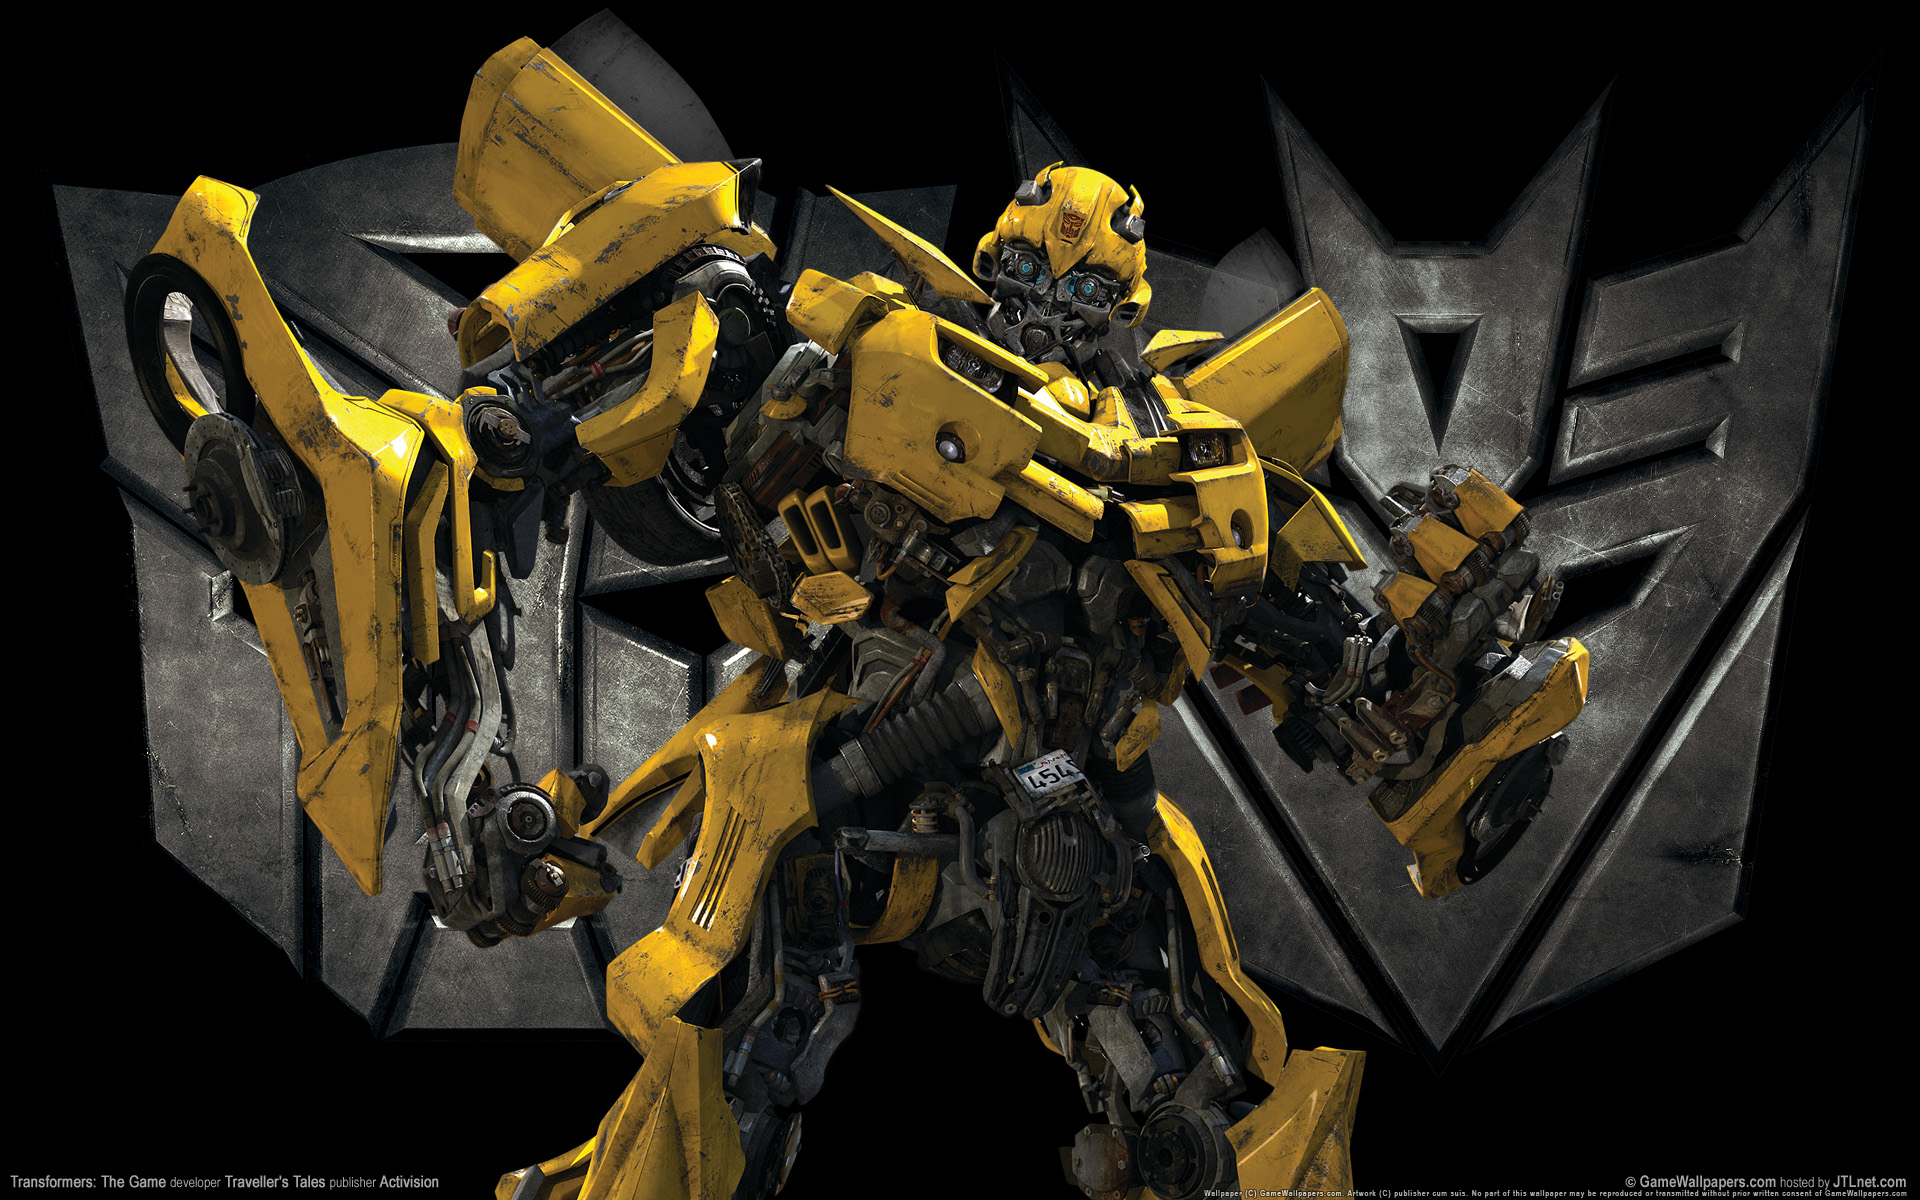 Widescreen Game Wallpaper Background Games Transformers Web